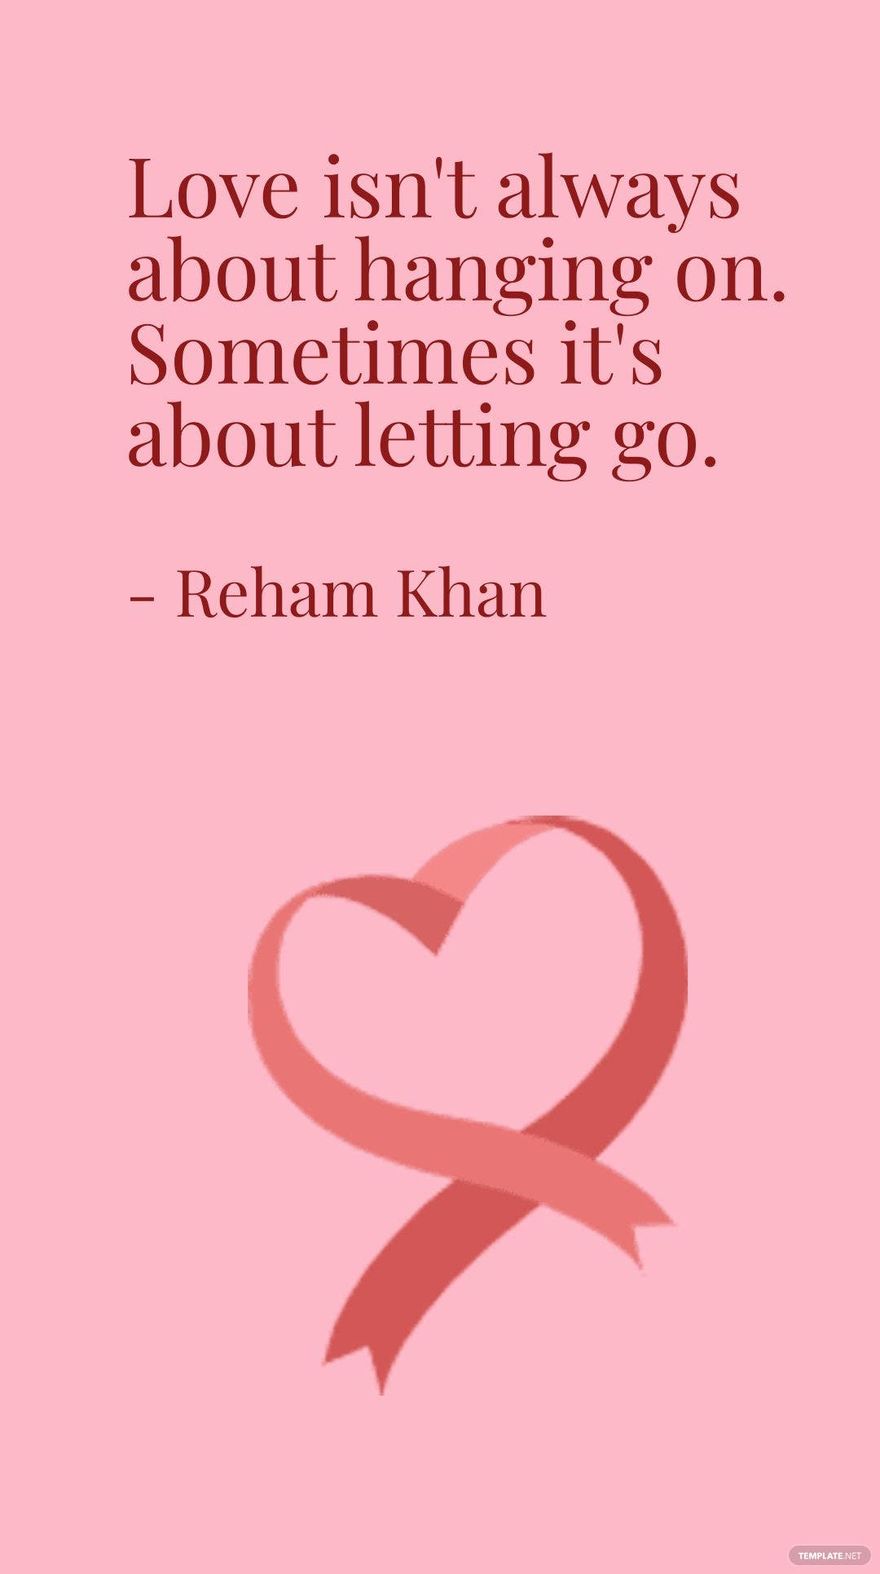 Free Reham Khan - Love isn't always about hanging on. Sometimes it's about letting go. in JPG